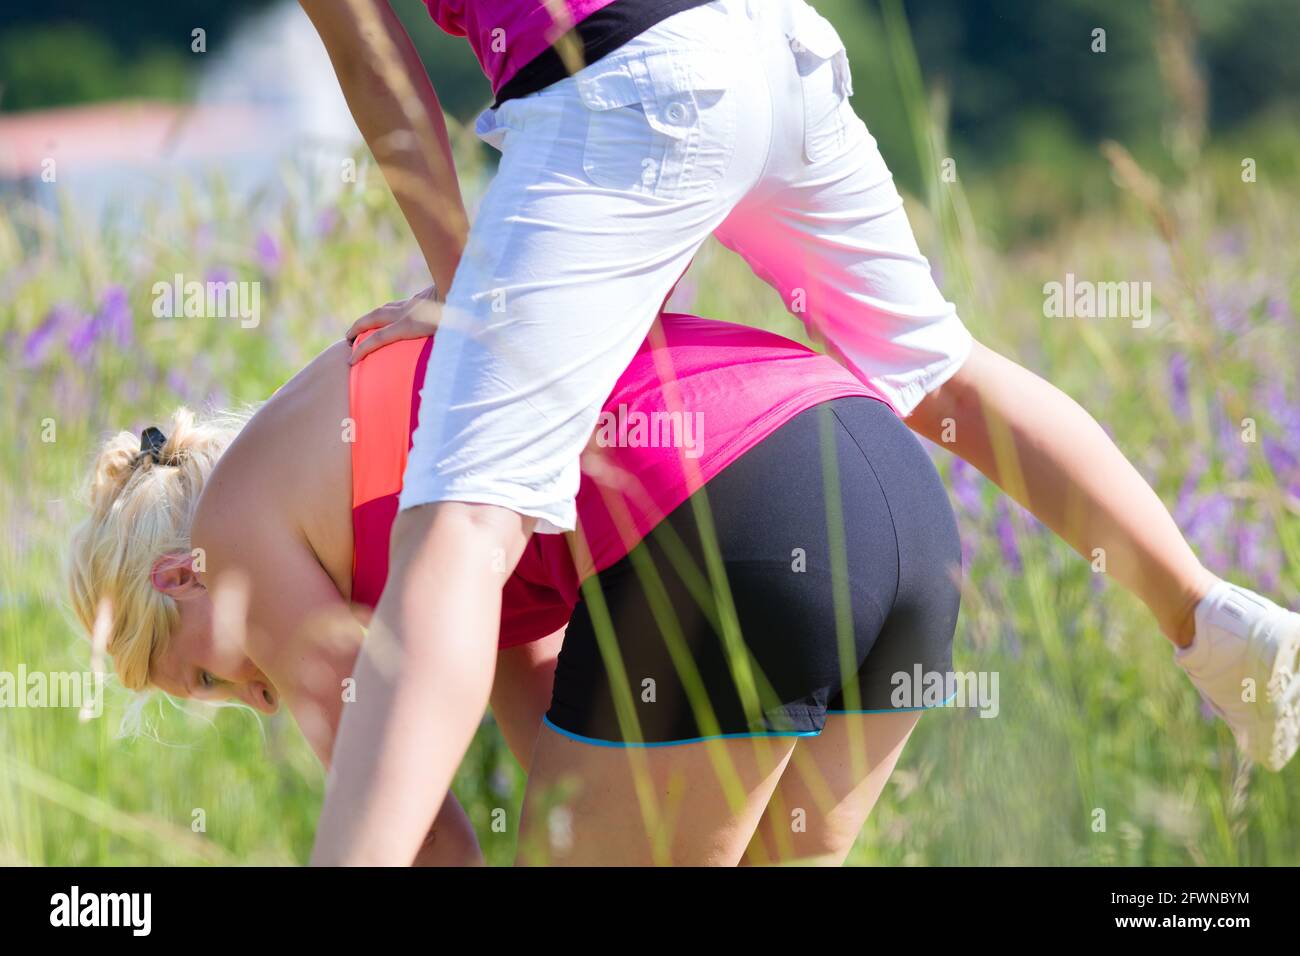 Girl jump outside in field over woman while leapfrogging Stock Photo